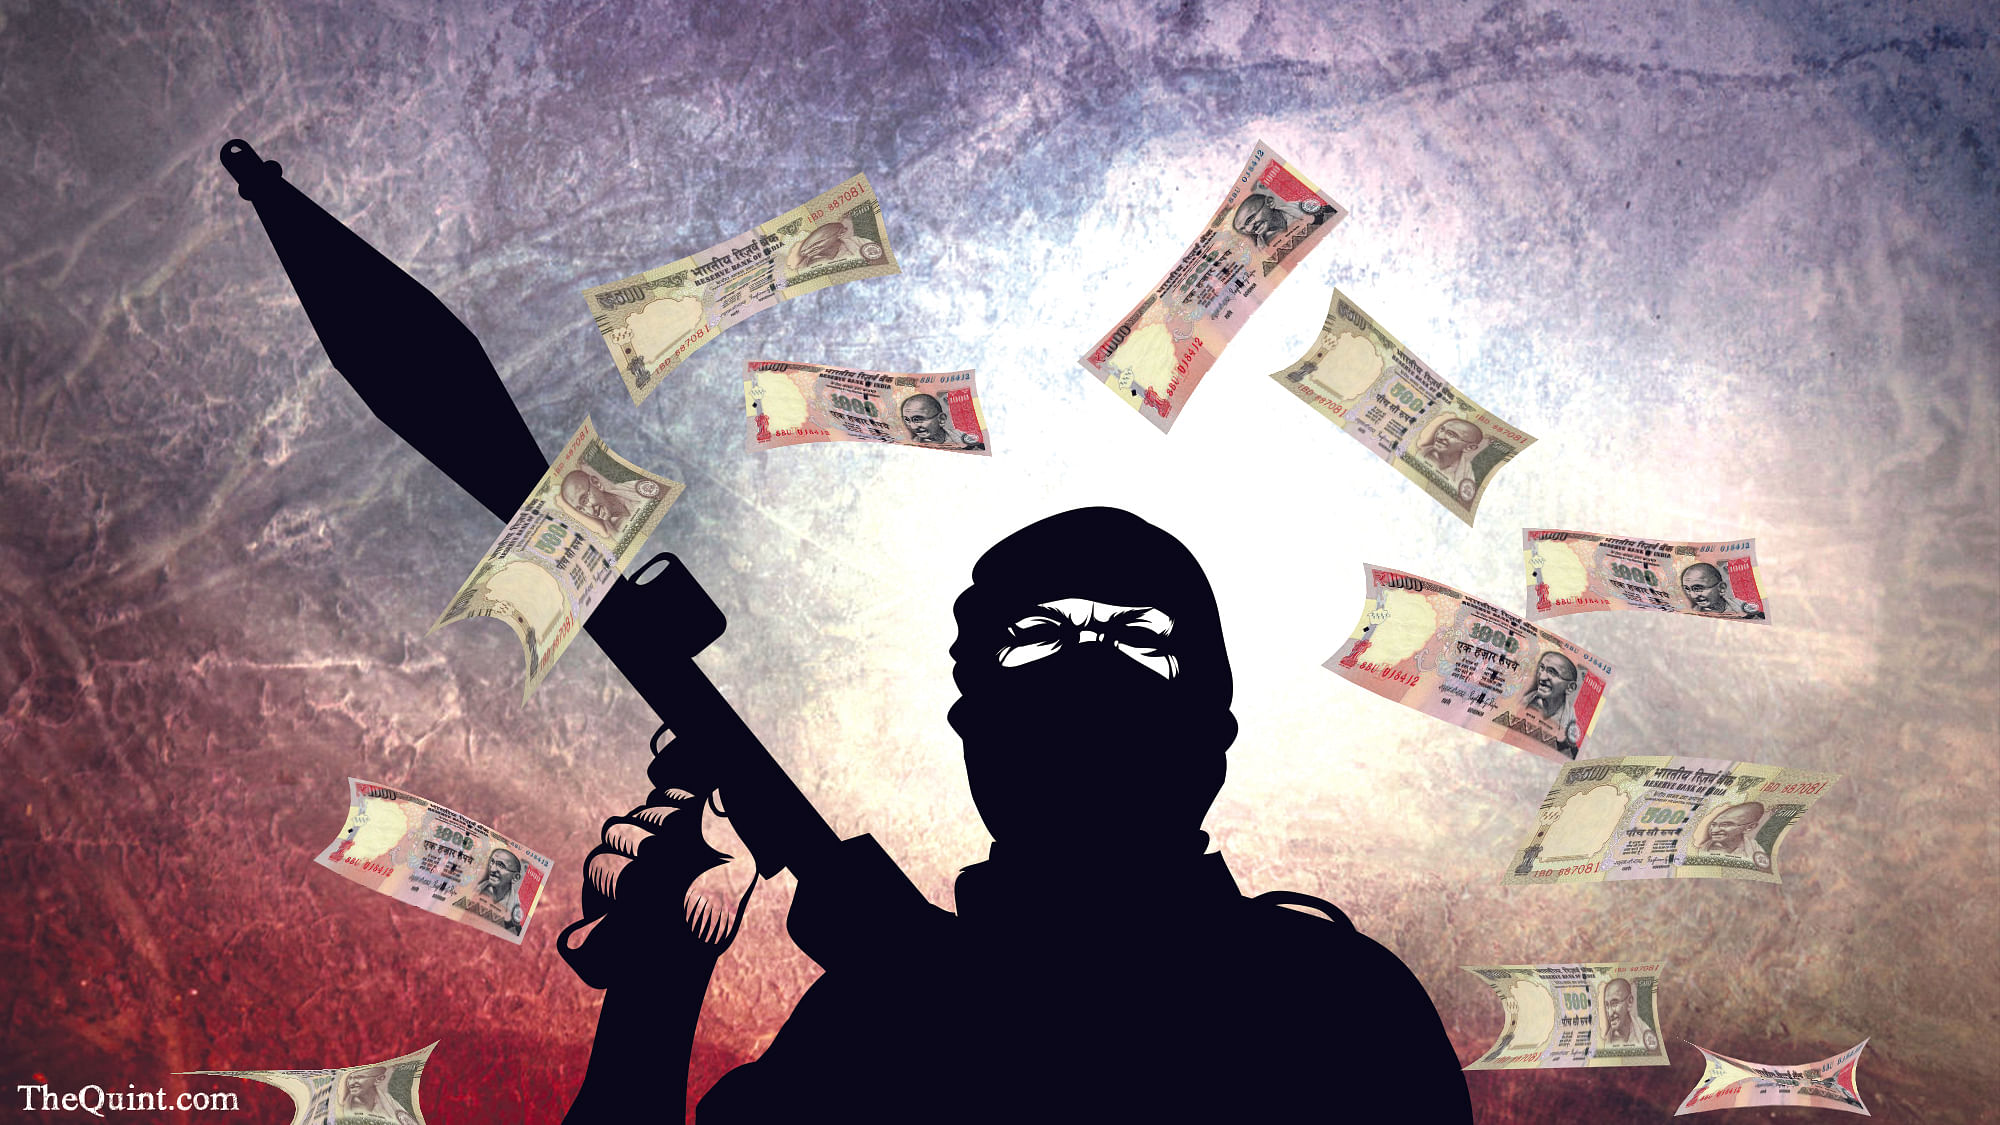 Terror financing in India does involve cash but that’s not the only way money changes hands. (Photo: The Quint)